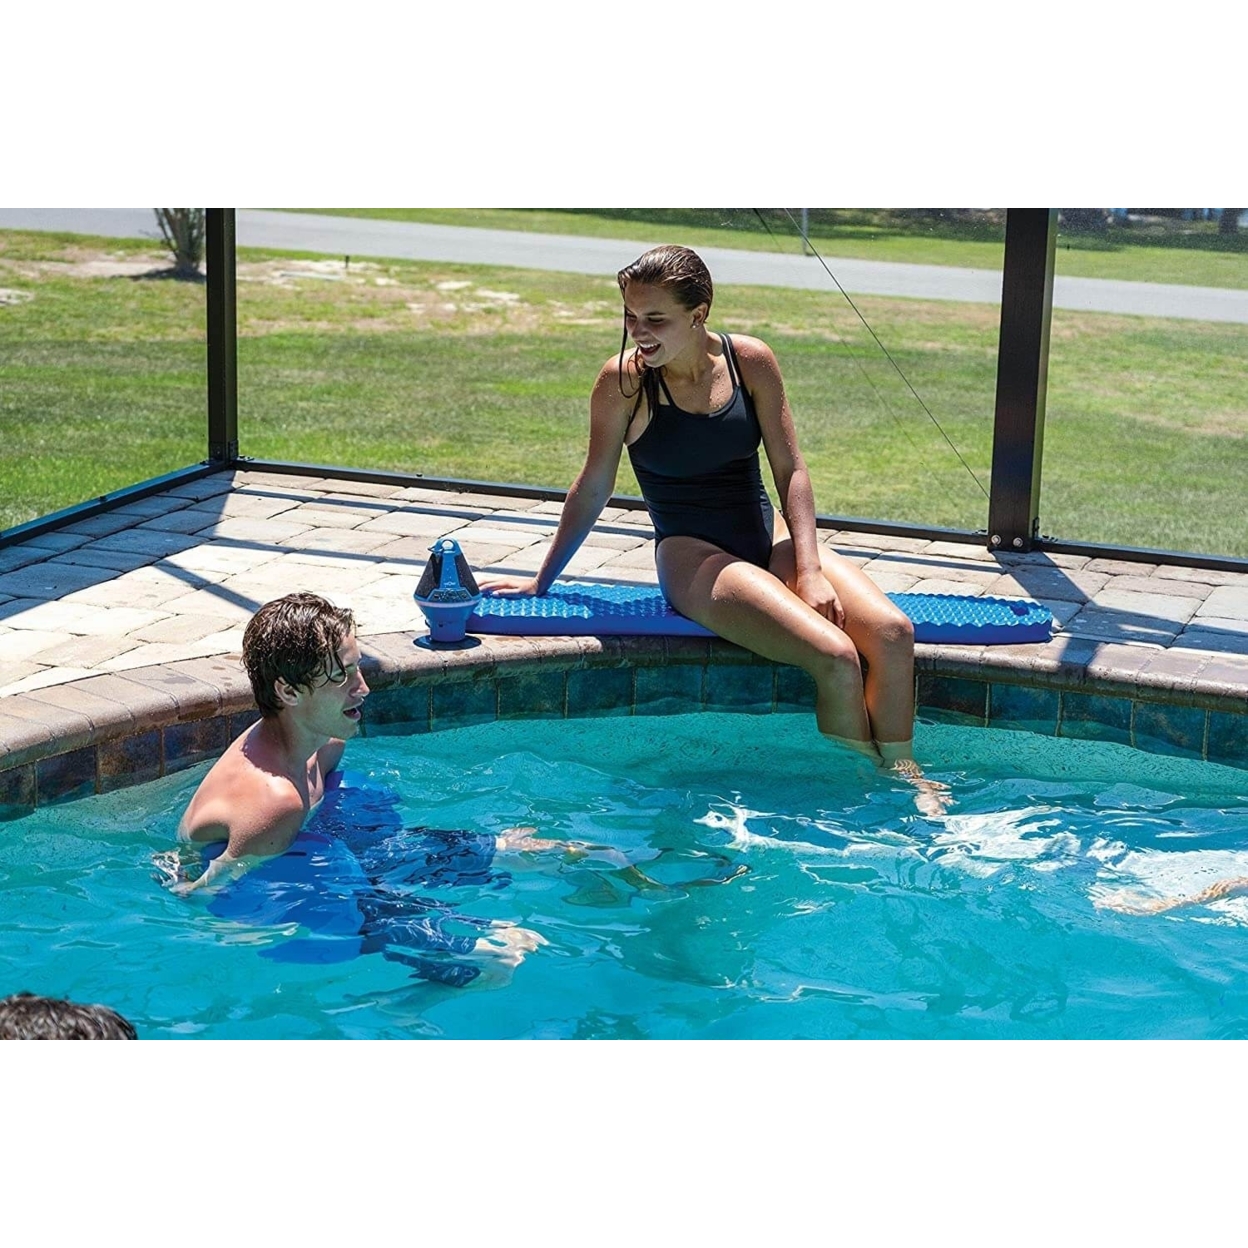 WOW Sports Pool Plank-Pacific Blue (20-2300)